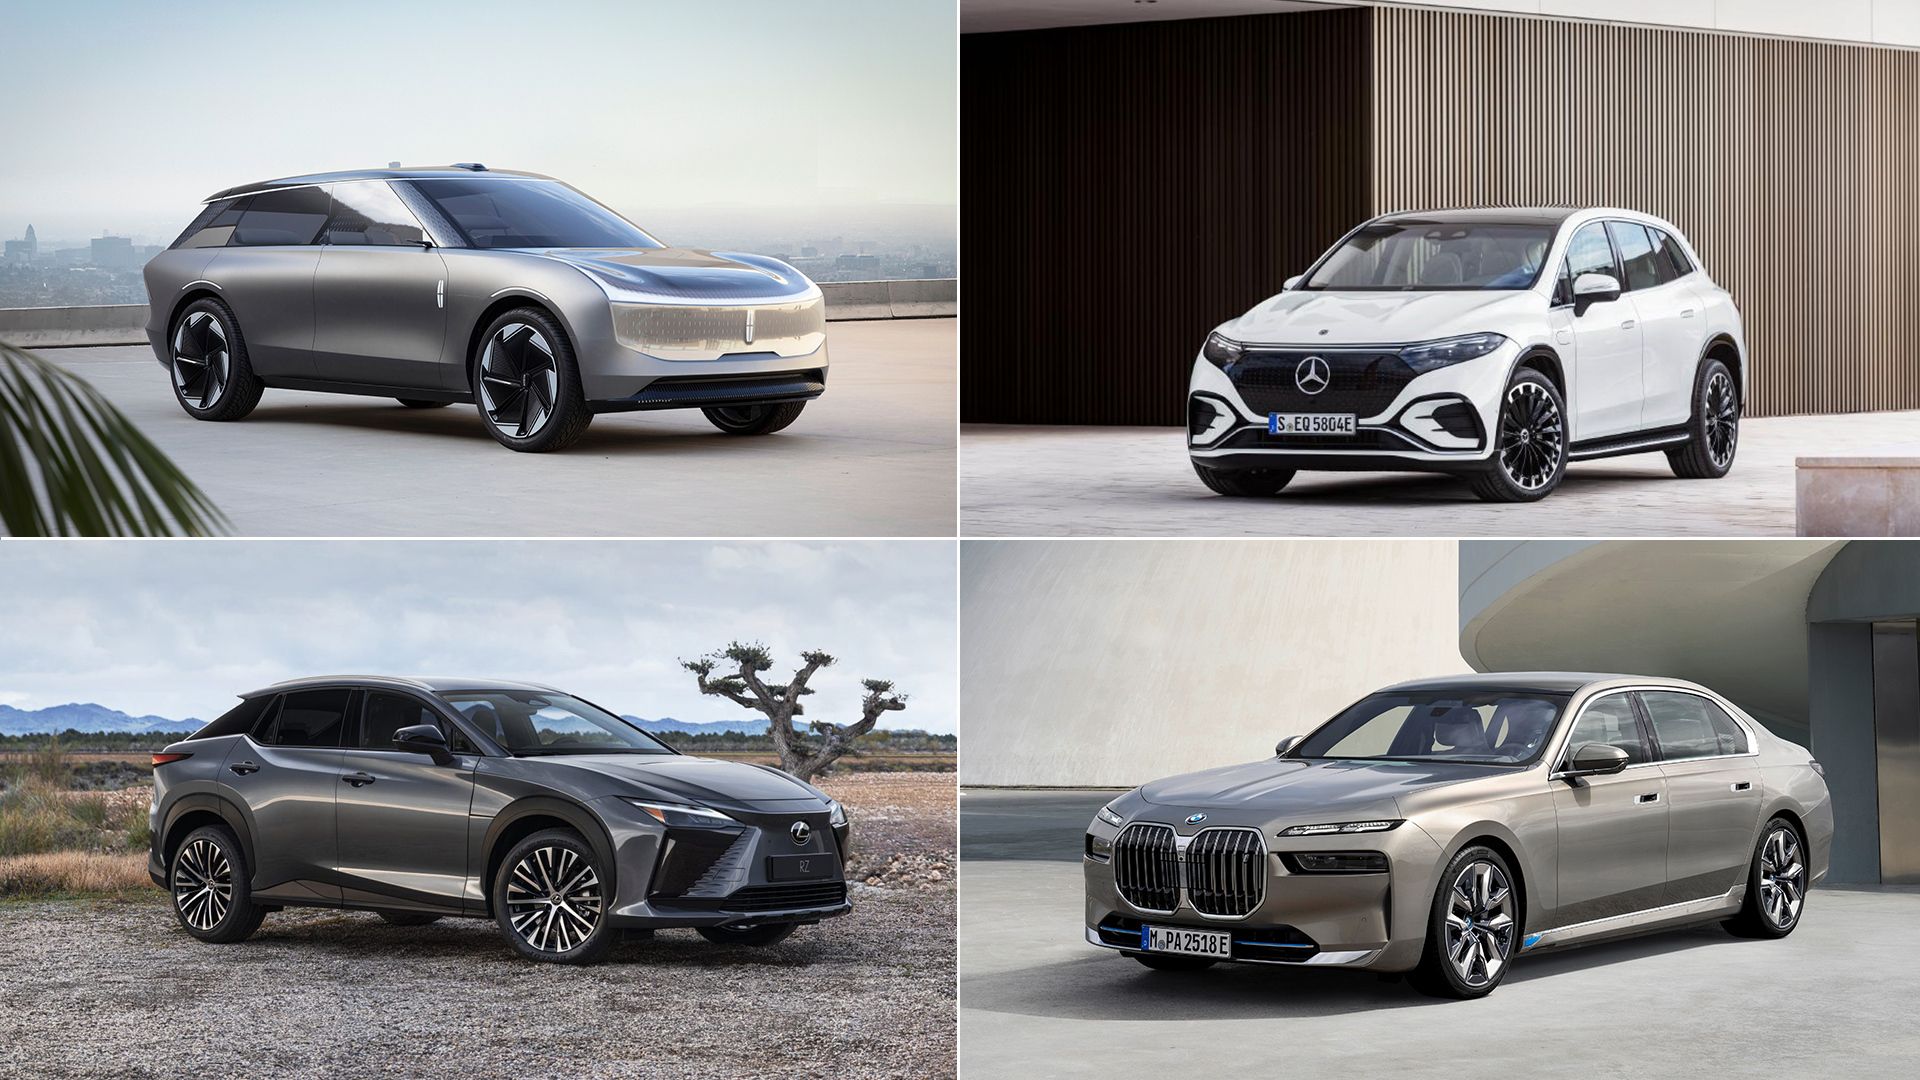 Four new models of EVs shown in a grid.